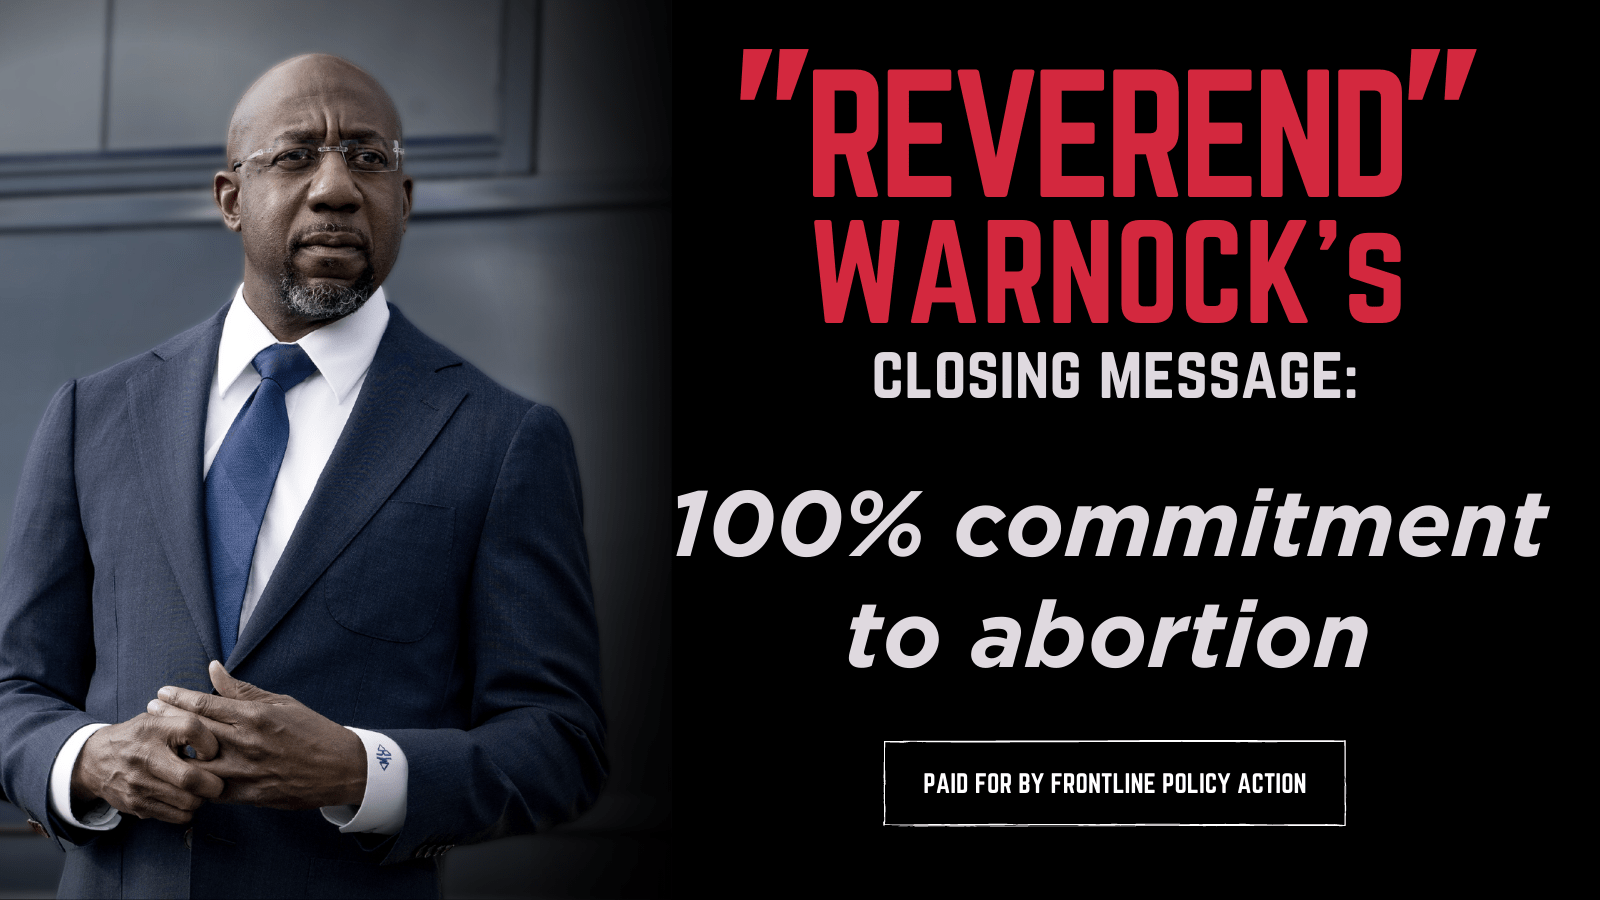 The “Reverend’s” Closing Message